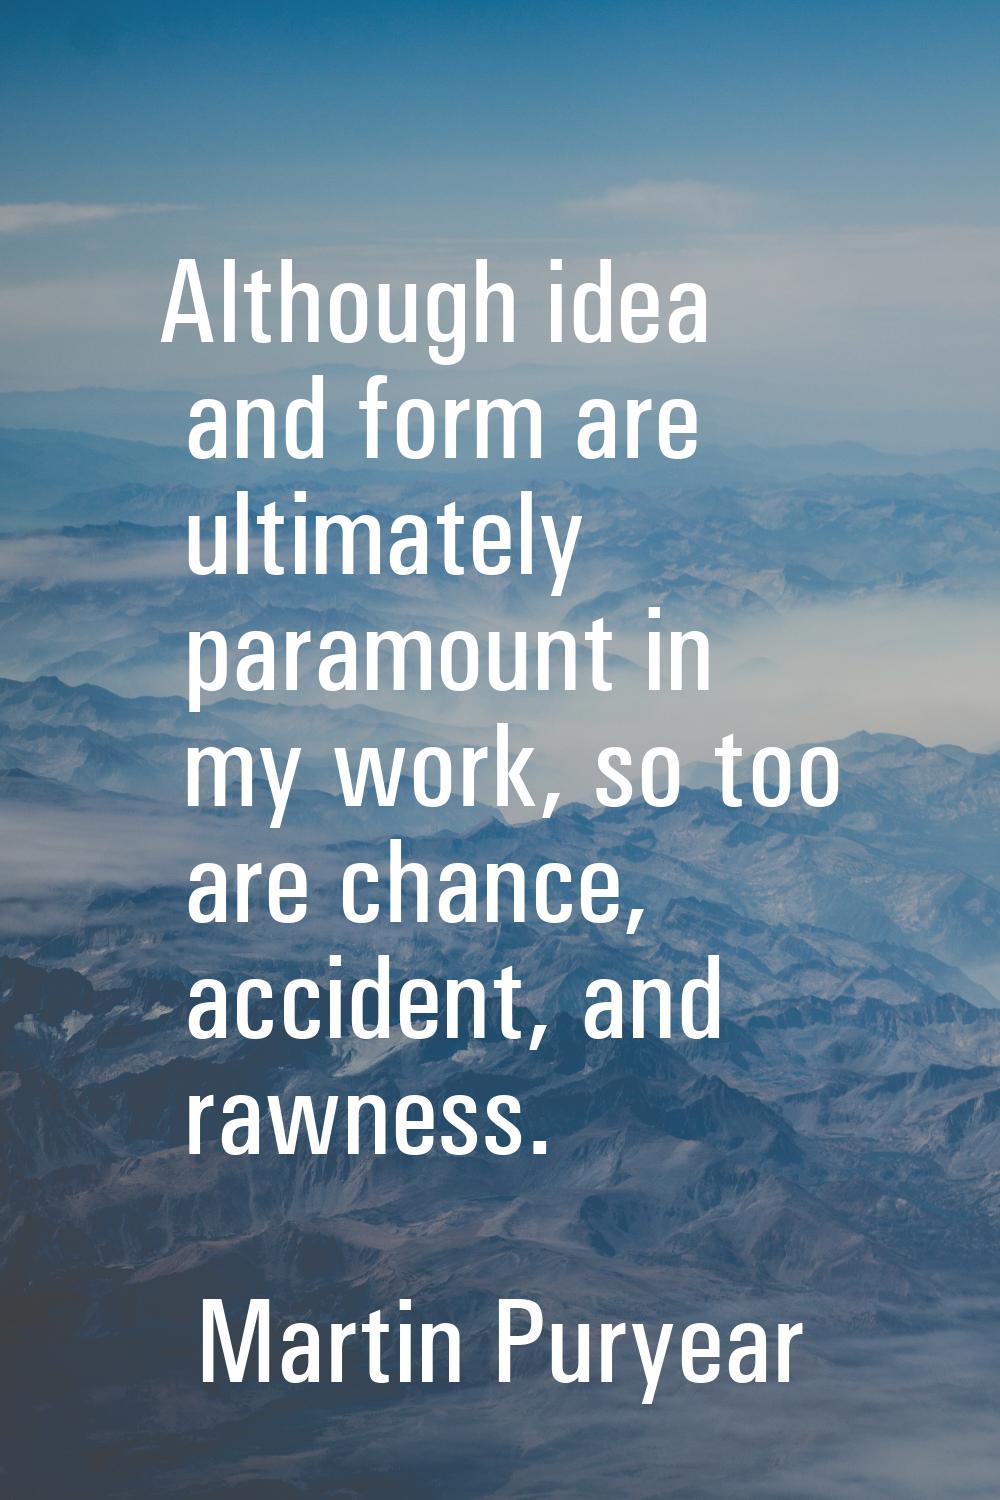 Although idea and form are ultimately paramount in my work, so too are chance, accident, and rawnes